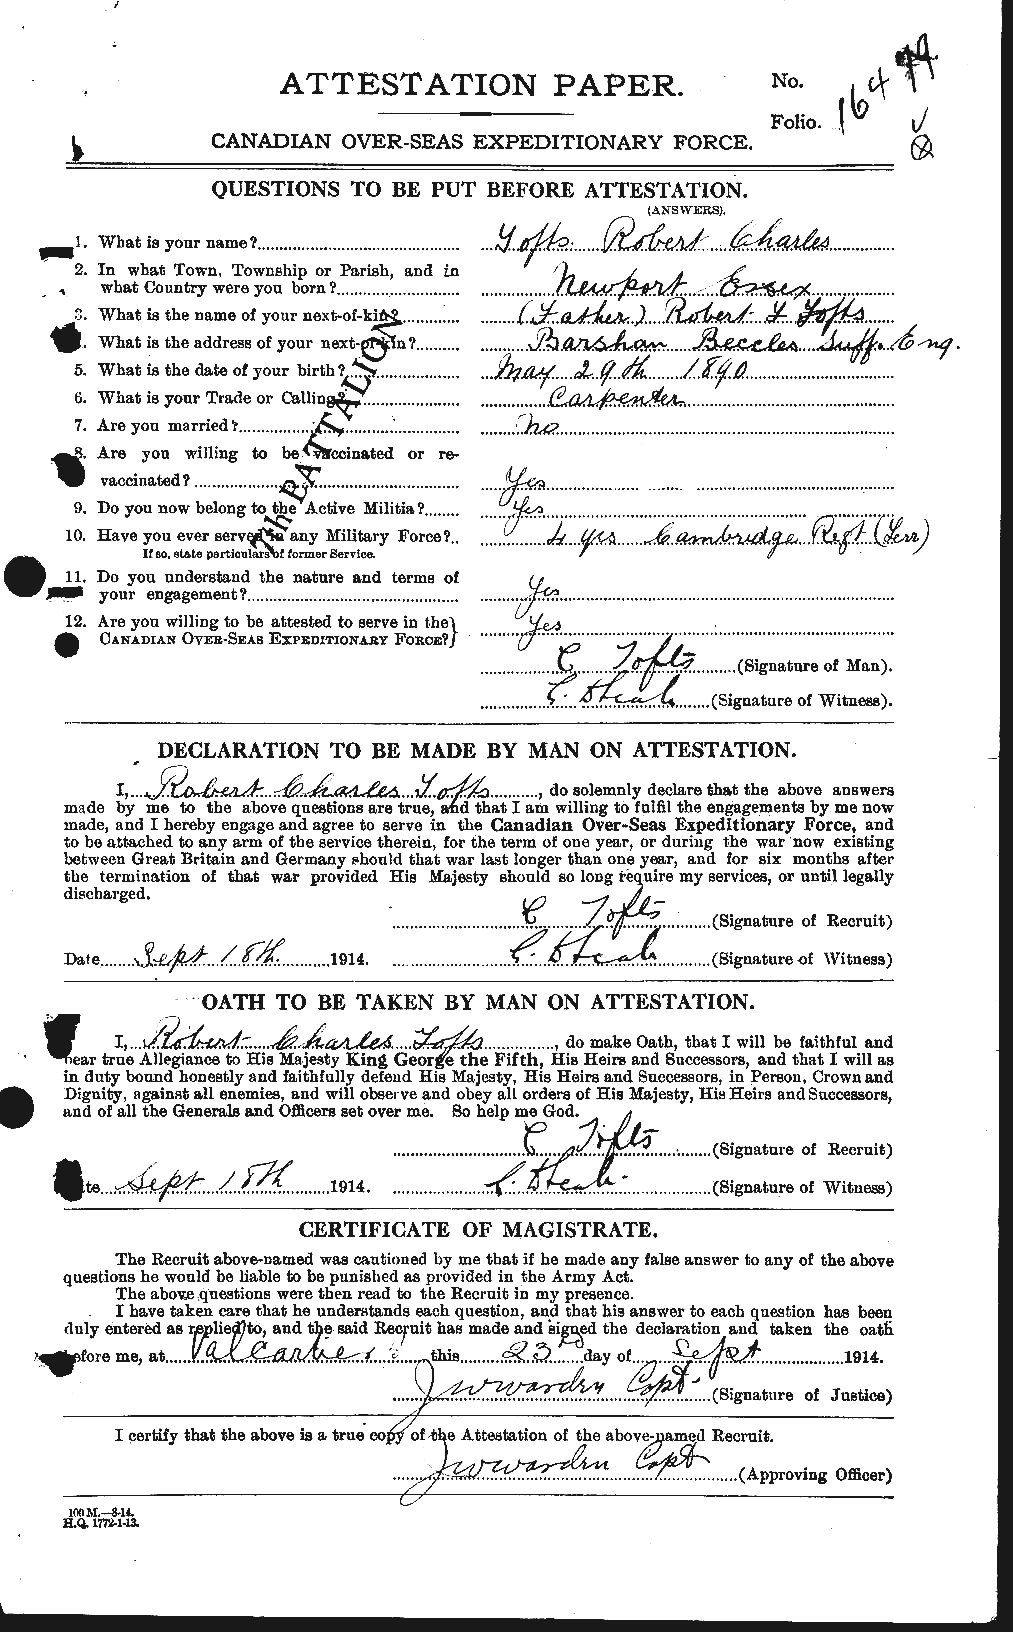 Personnel Records of the First World War - CEF 640954a